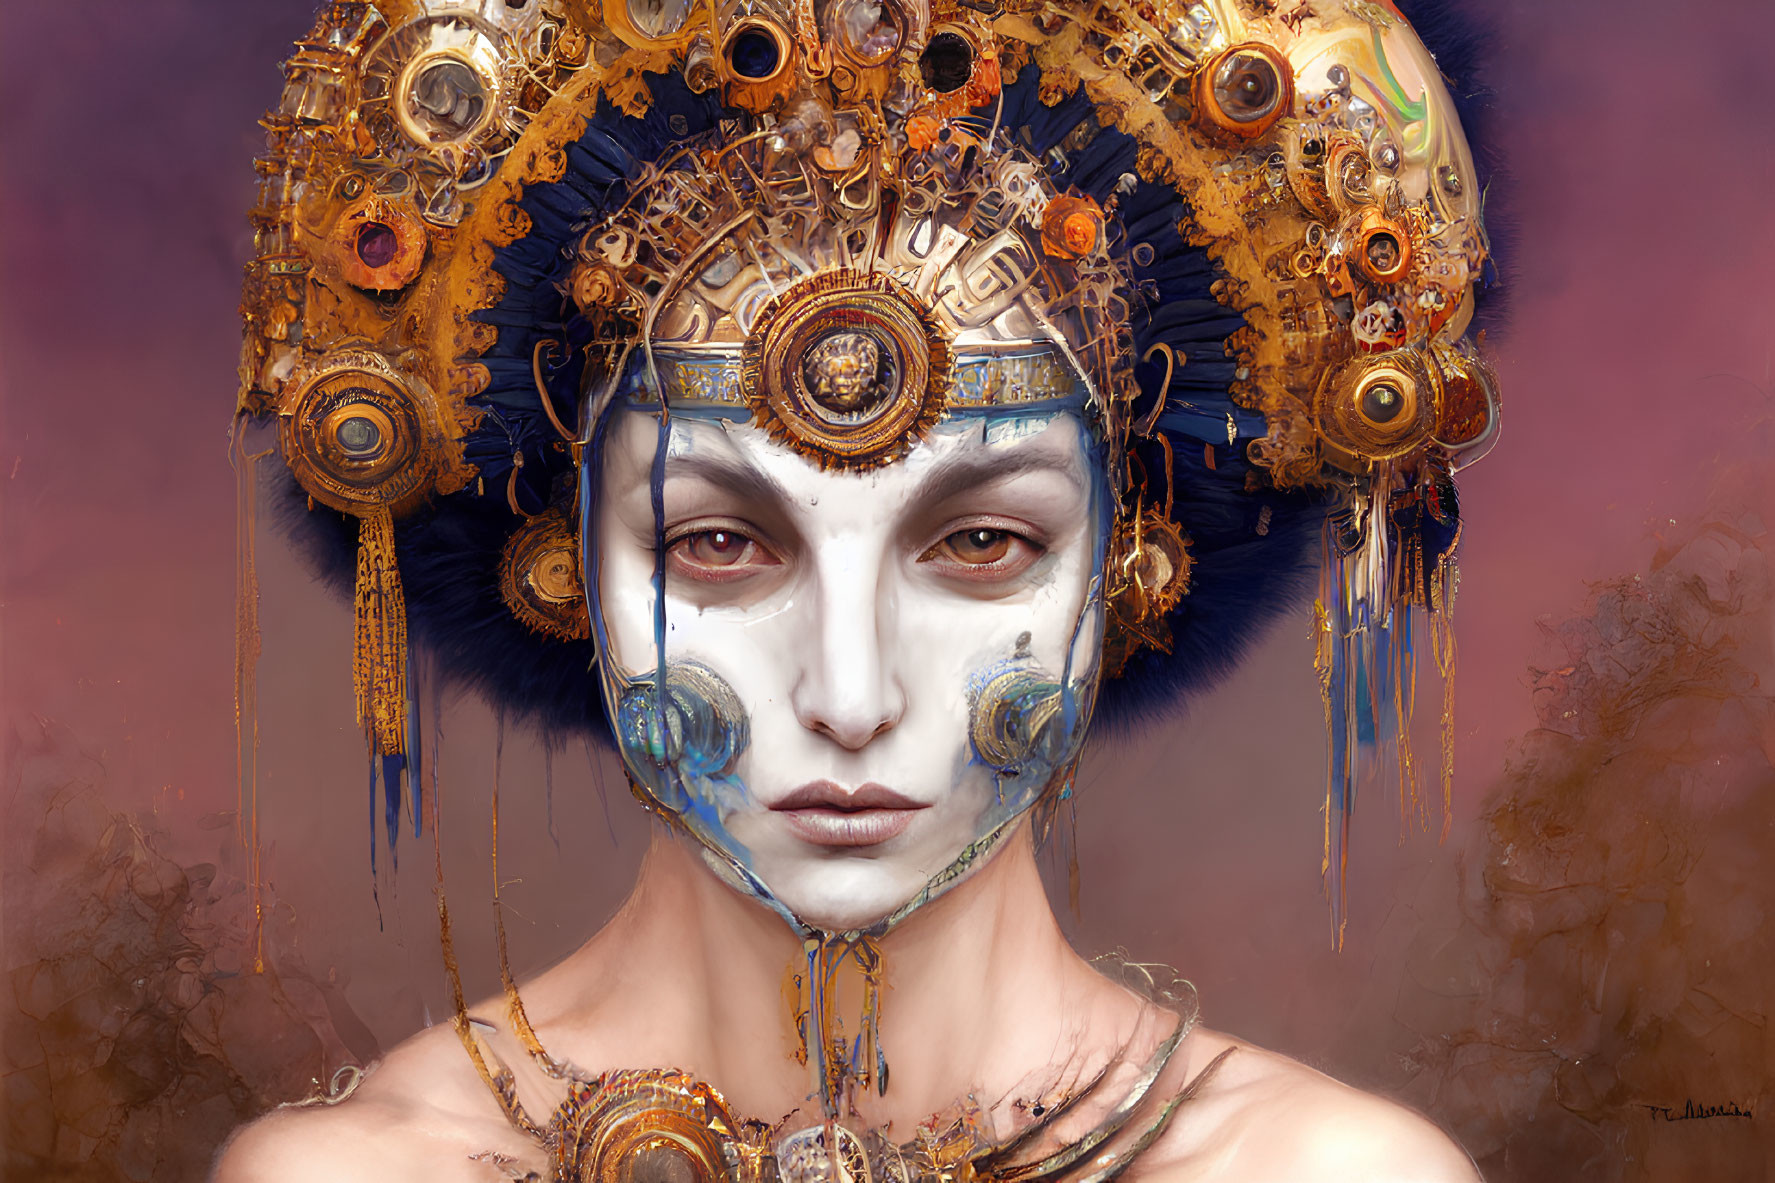 Intricate gold mechanical headdress on person against burgundy backdrop